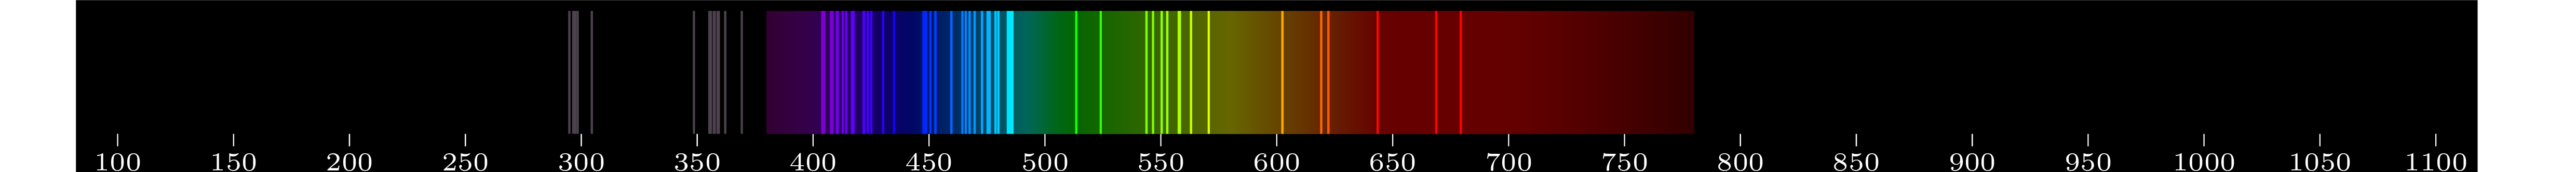 emmision spectra of element Y